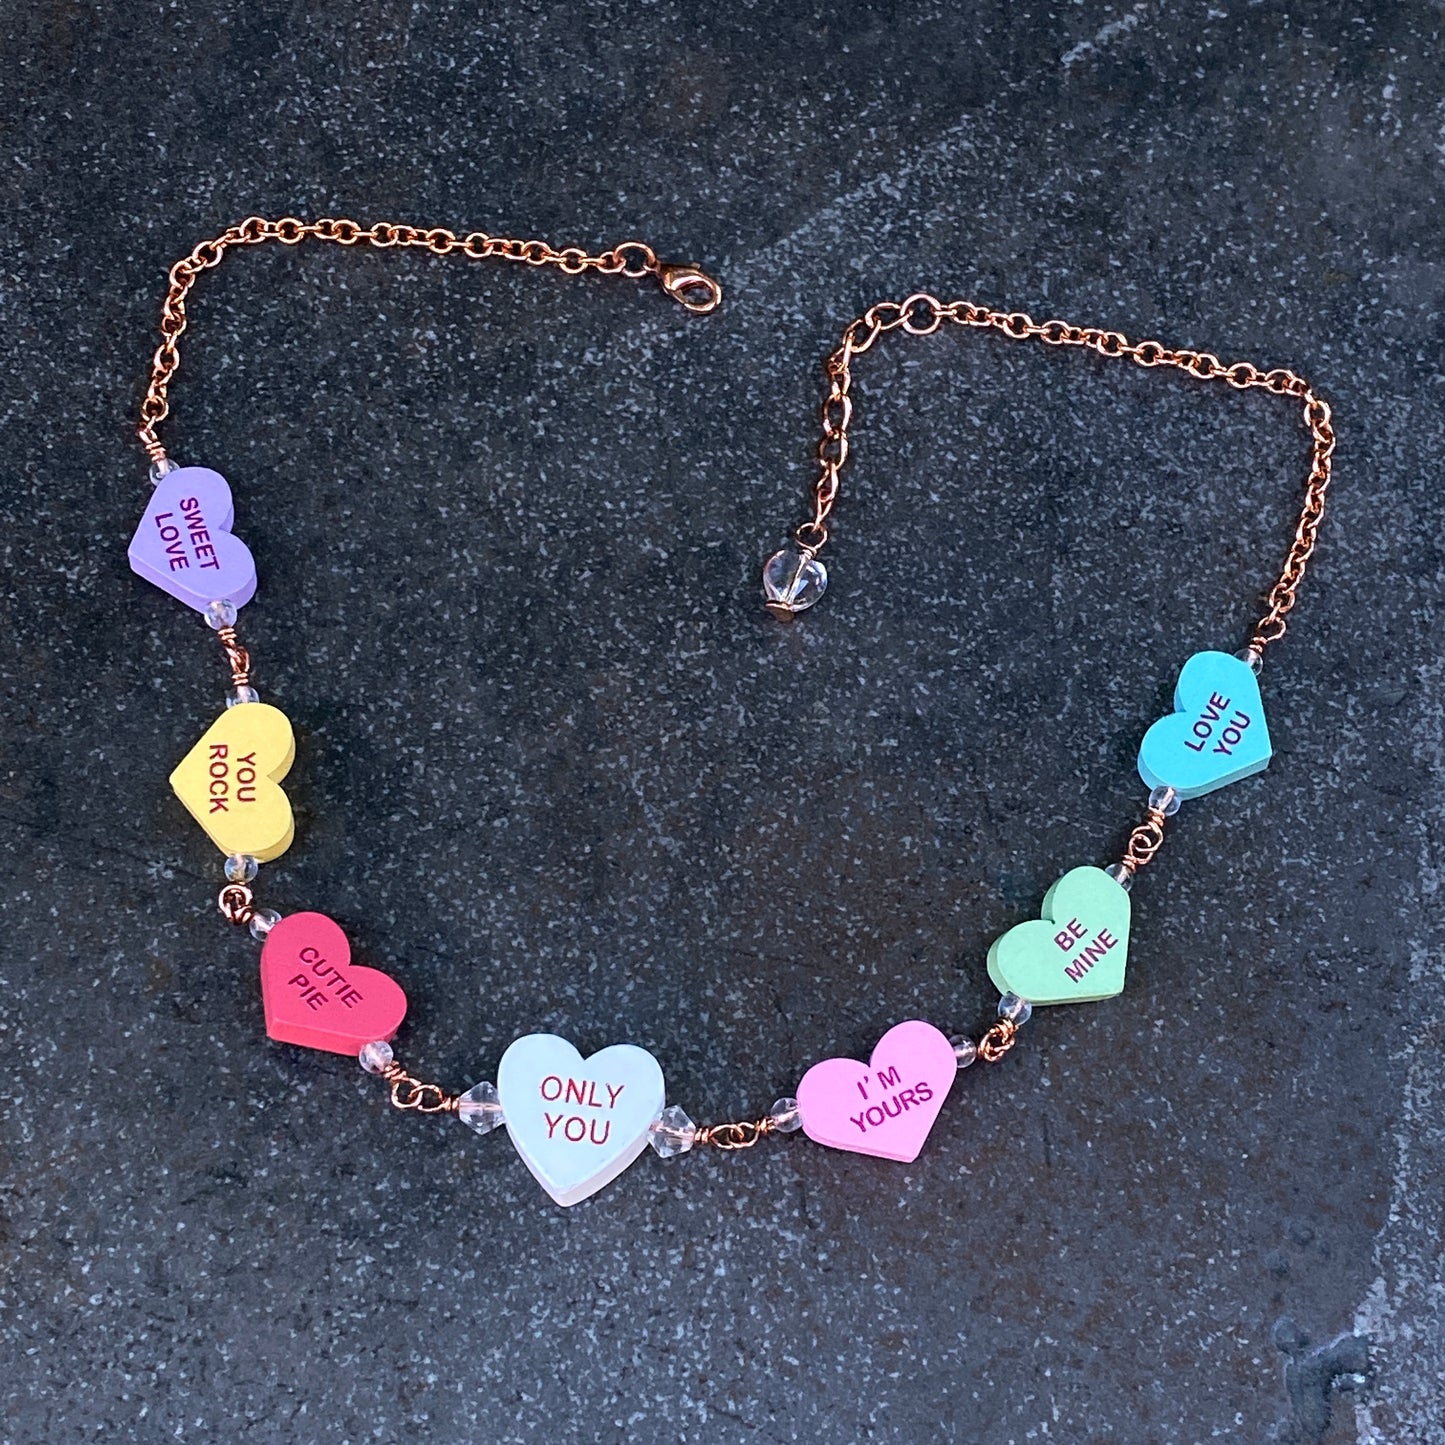 Candy Heart Necklace with Quartz